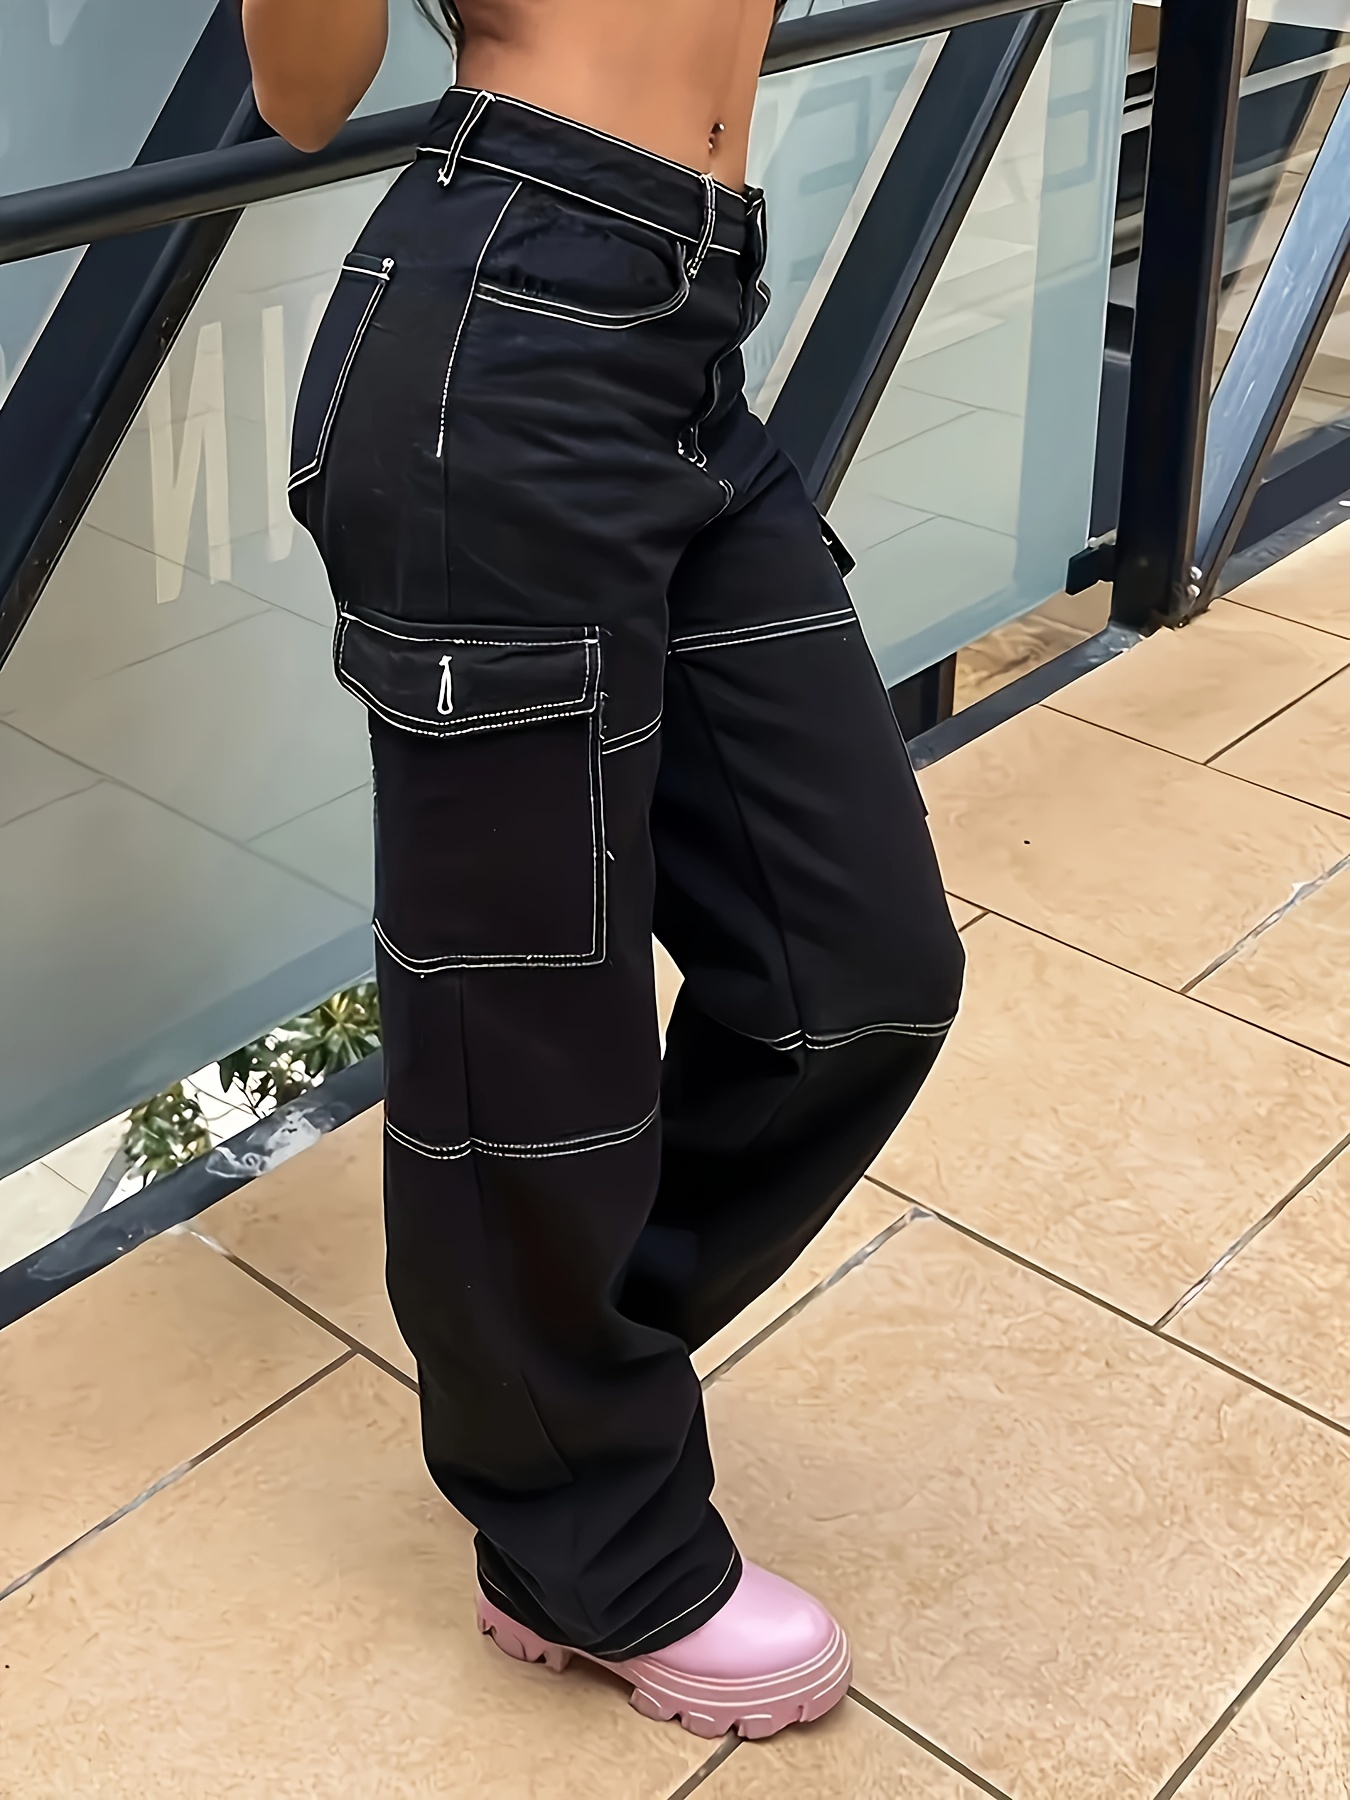 Black Cargo Pants With Buckle Belt – Aesthetic Clothing